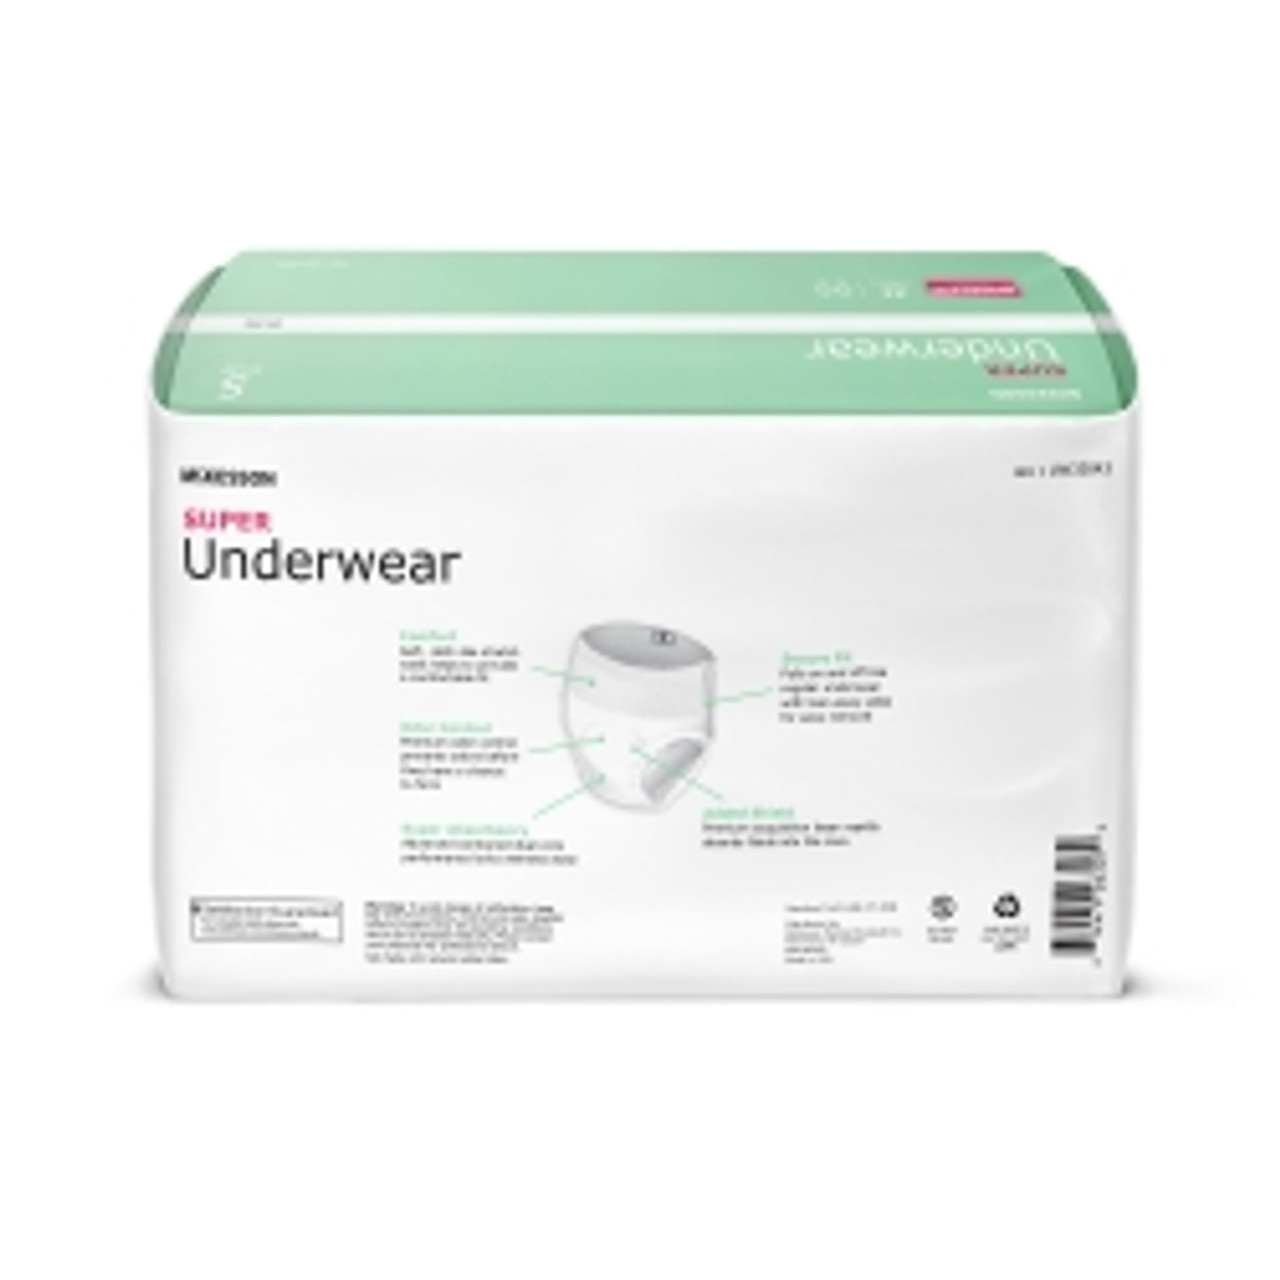 Adult Briefs - McKesson Unisex Pull On with Tear Away Seams